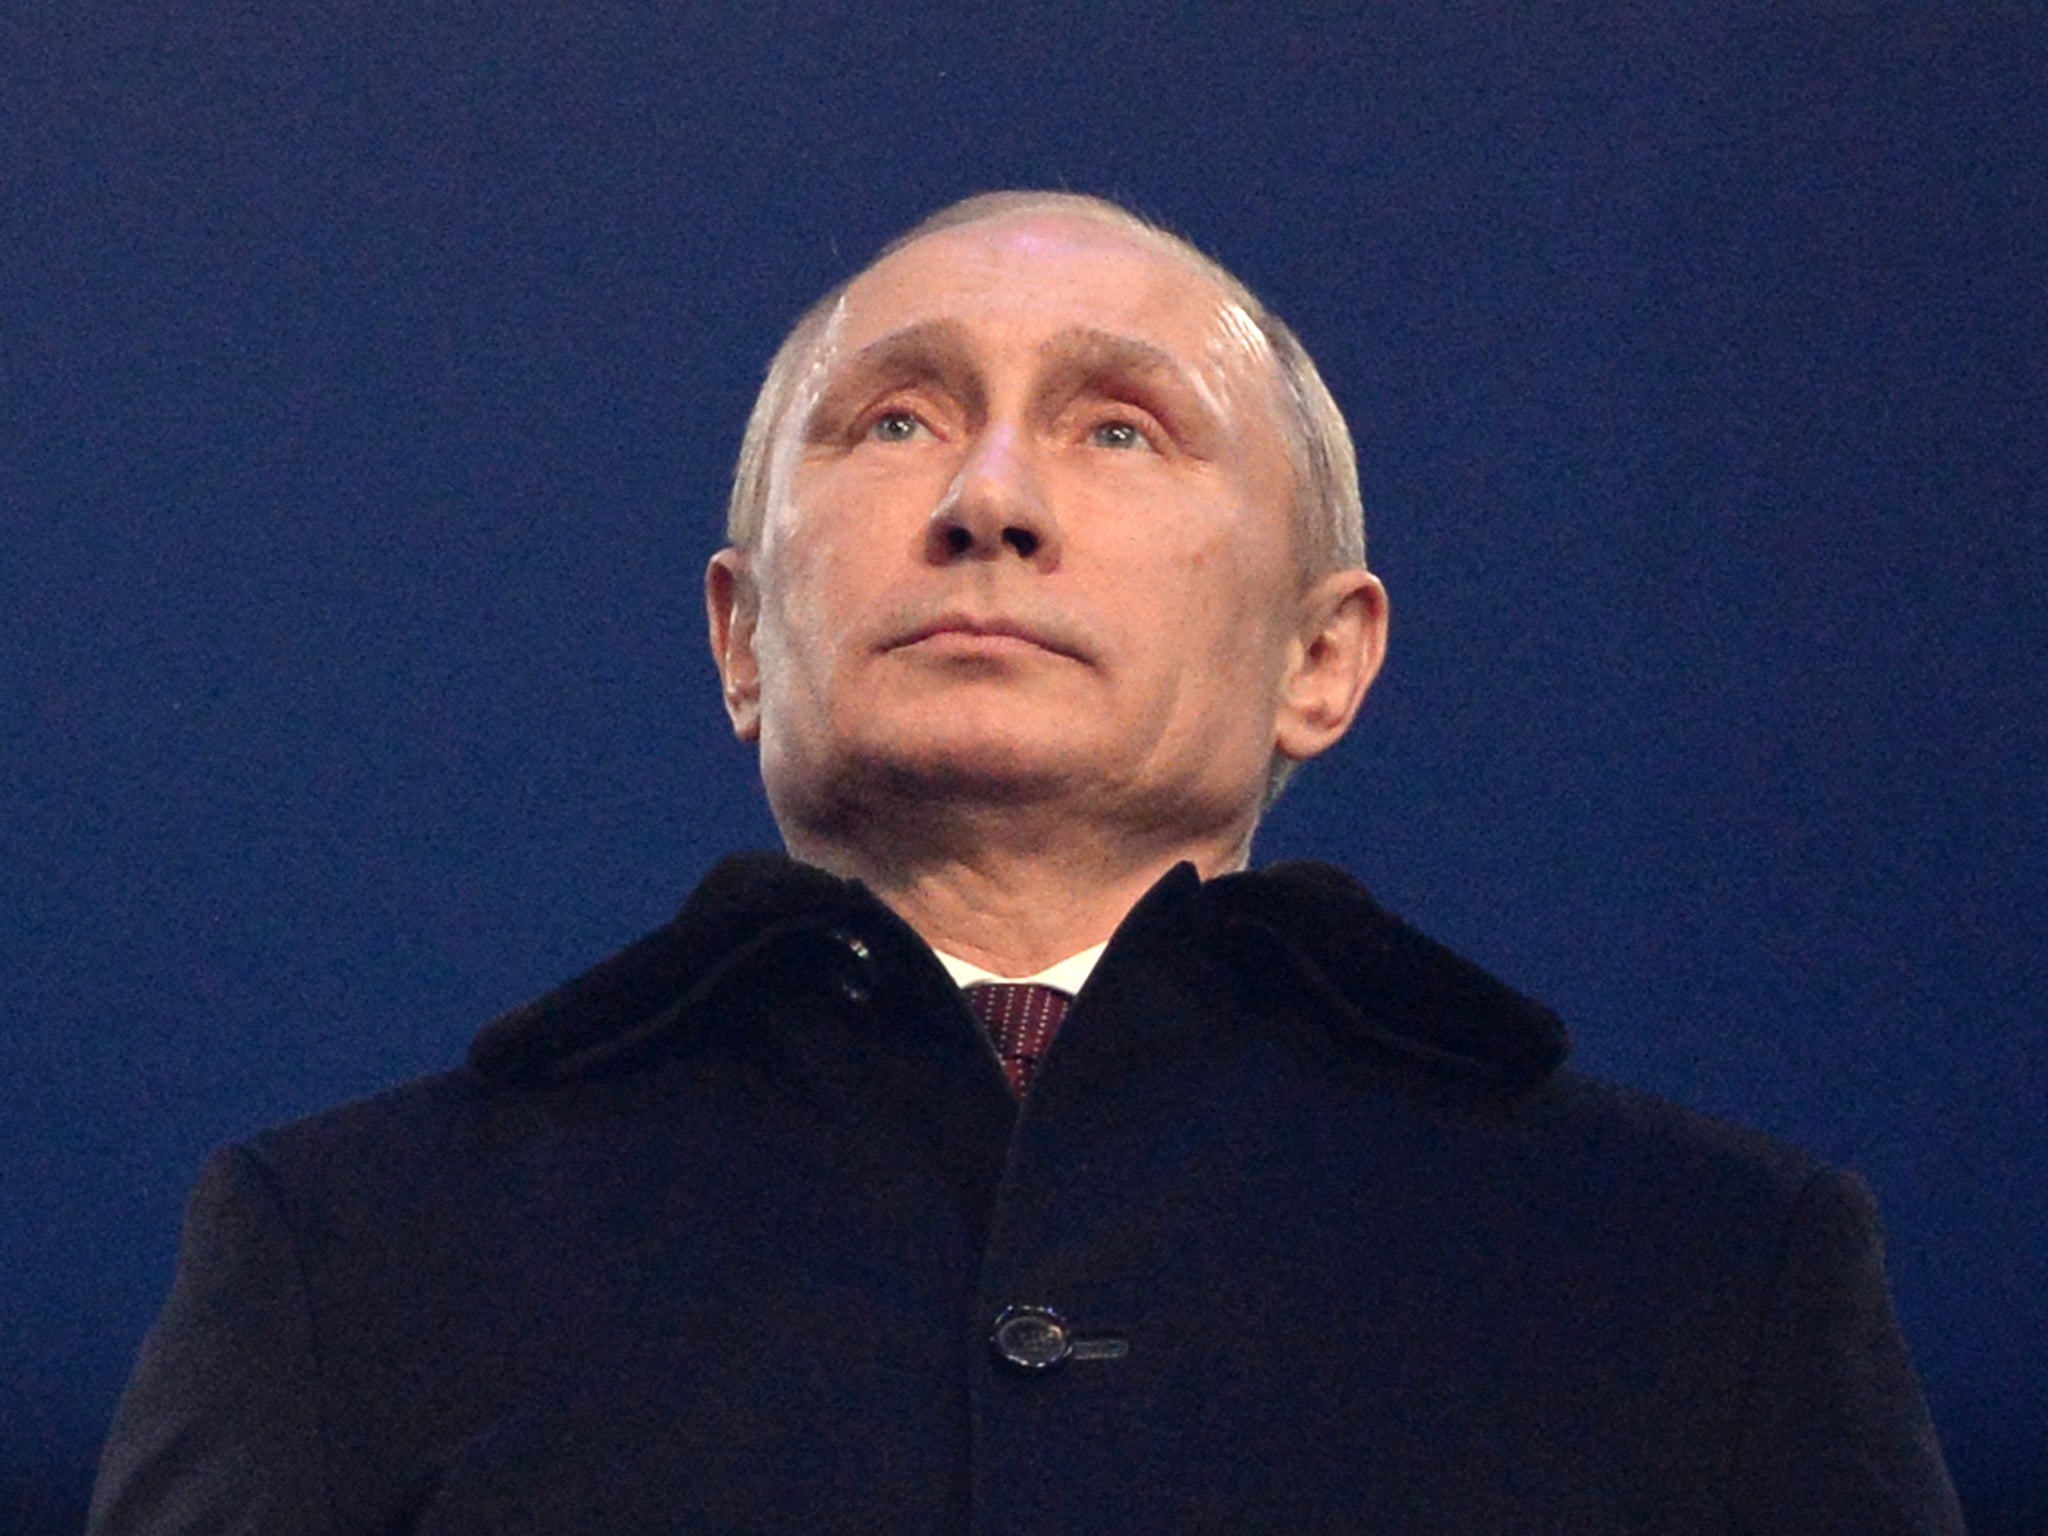 Vladimir Putin was said to be 'satisfied' with the opening ceremony for the Sochi Winter Olympics